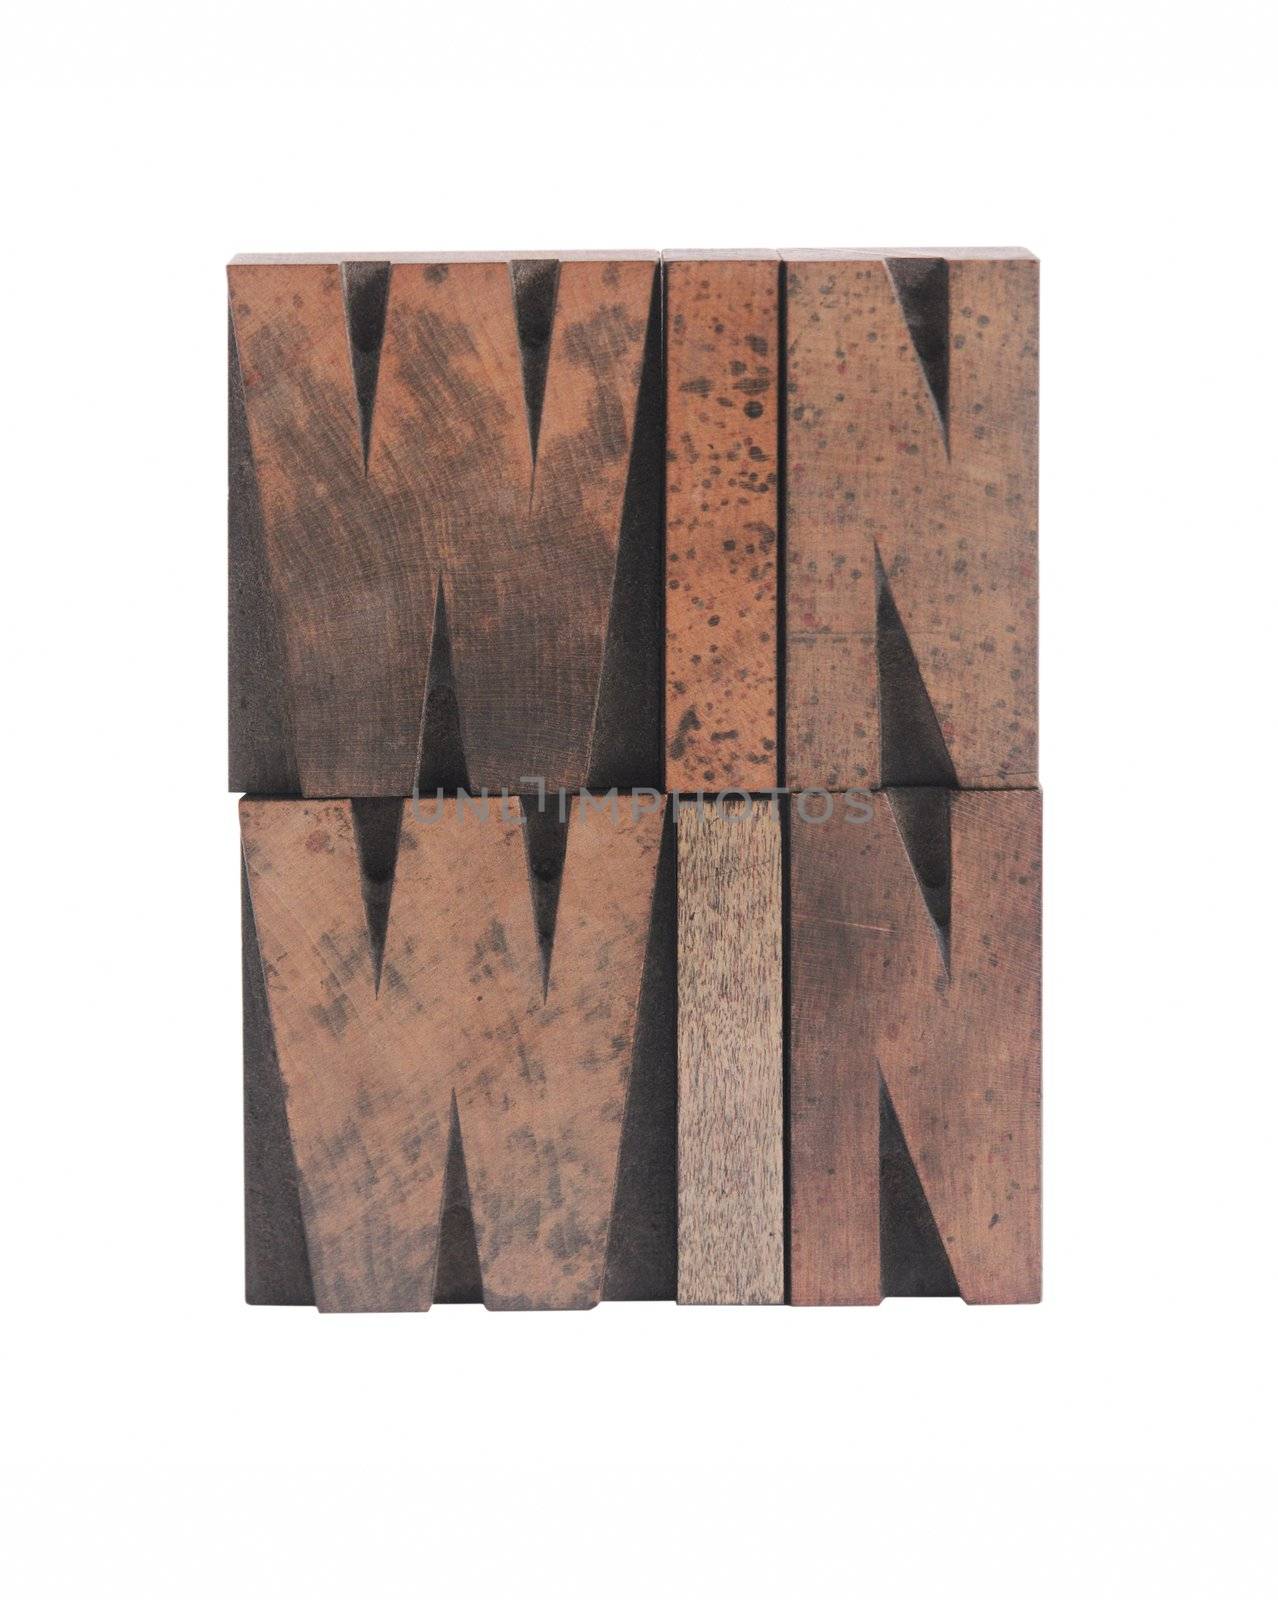 the words 'win win' in old ink-stained wood type